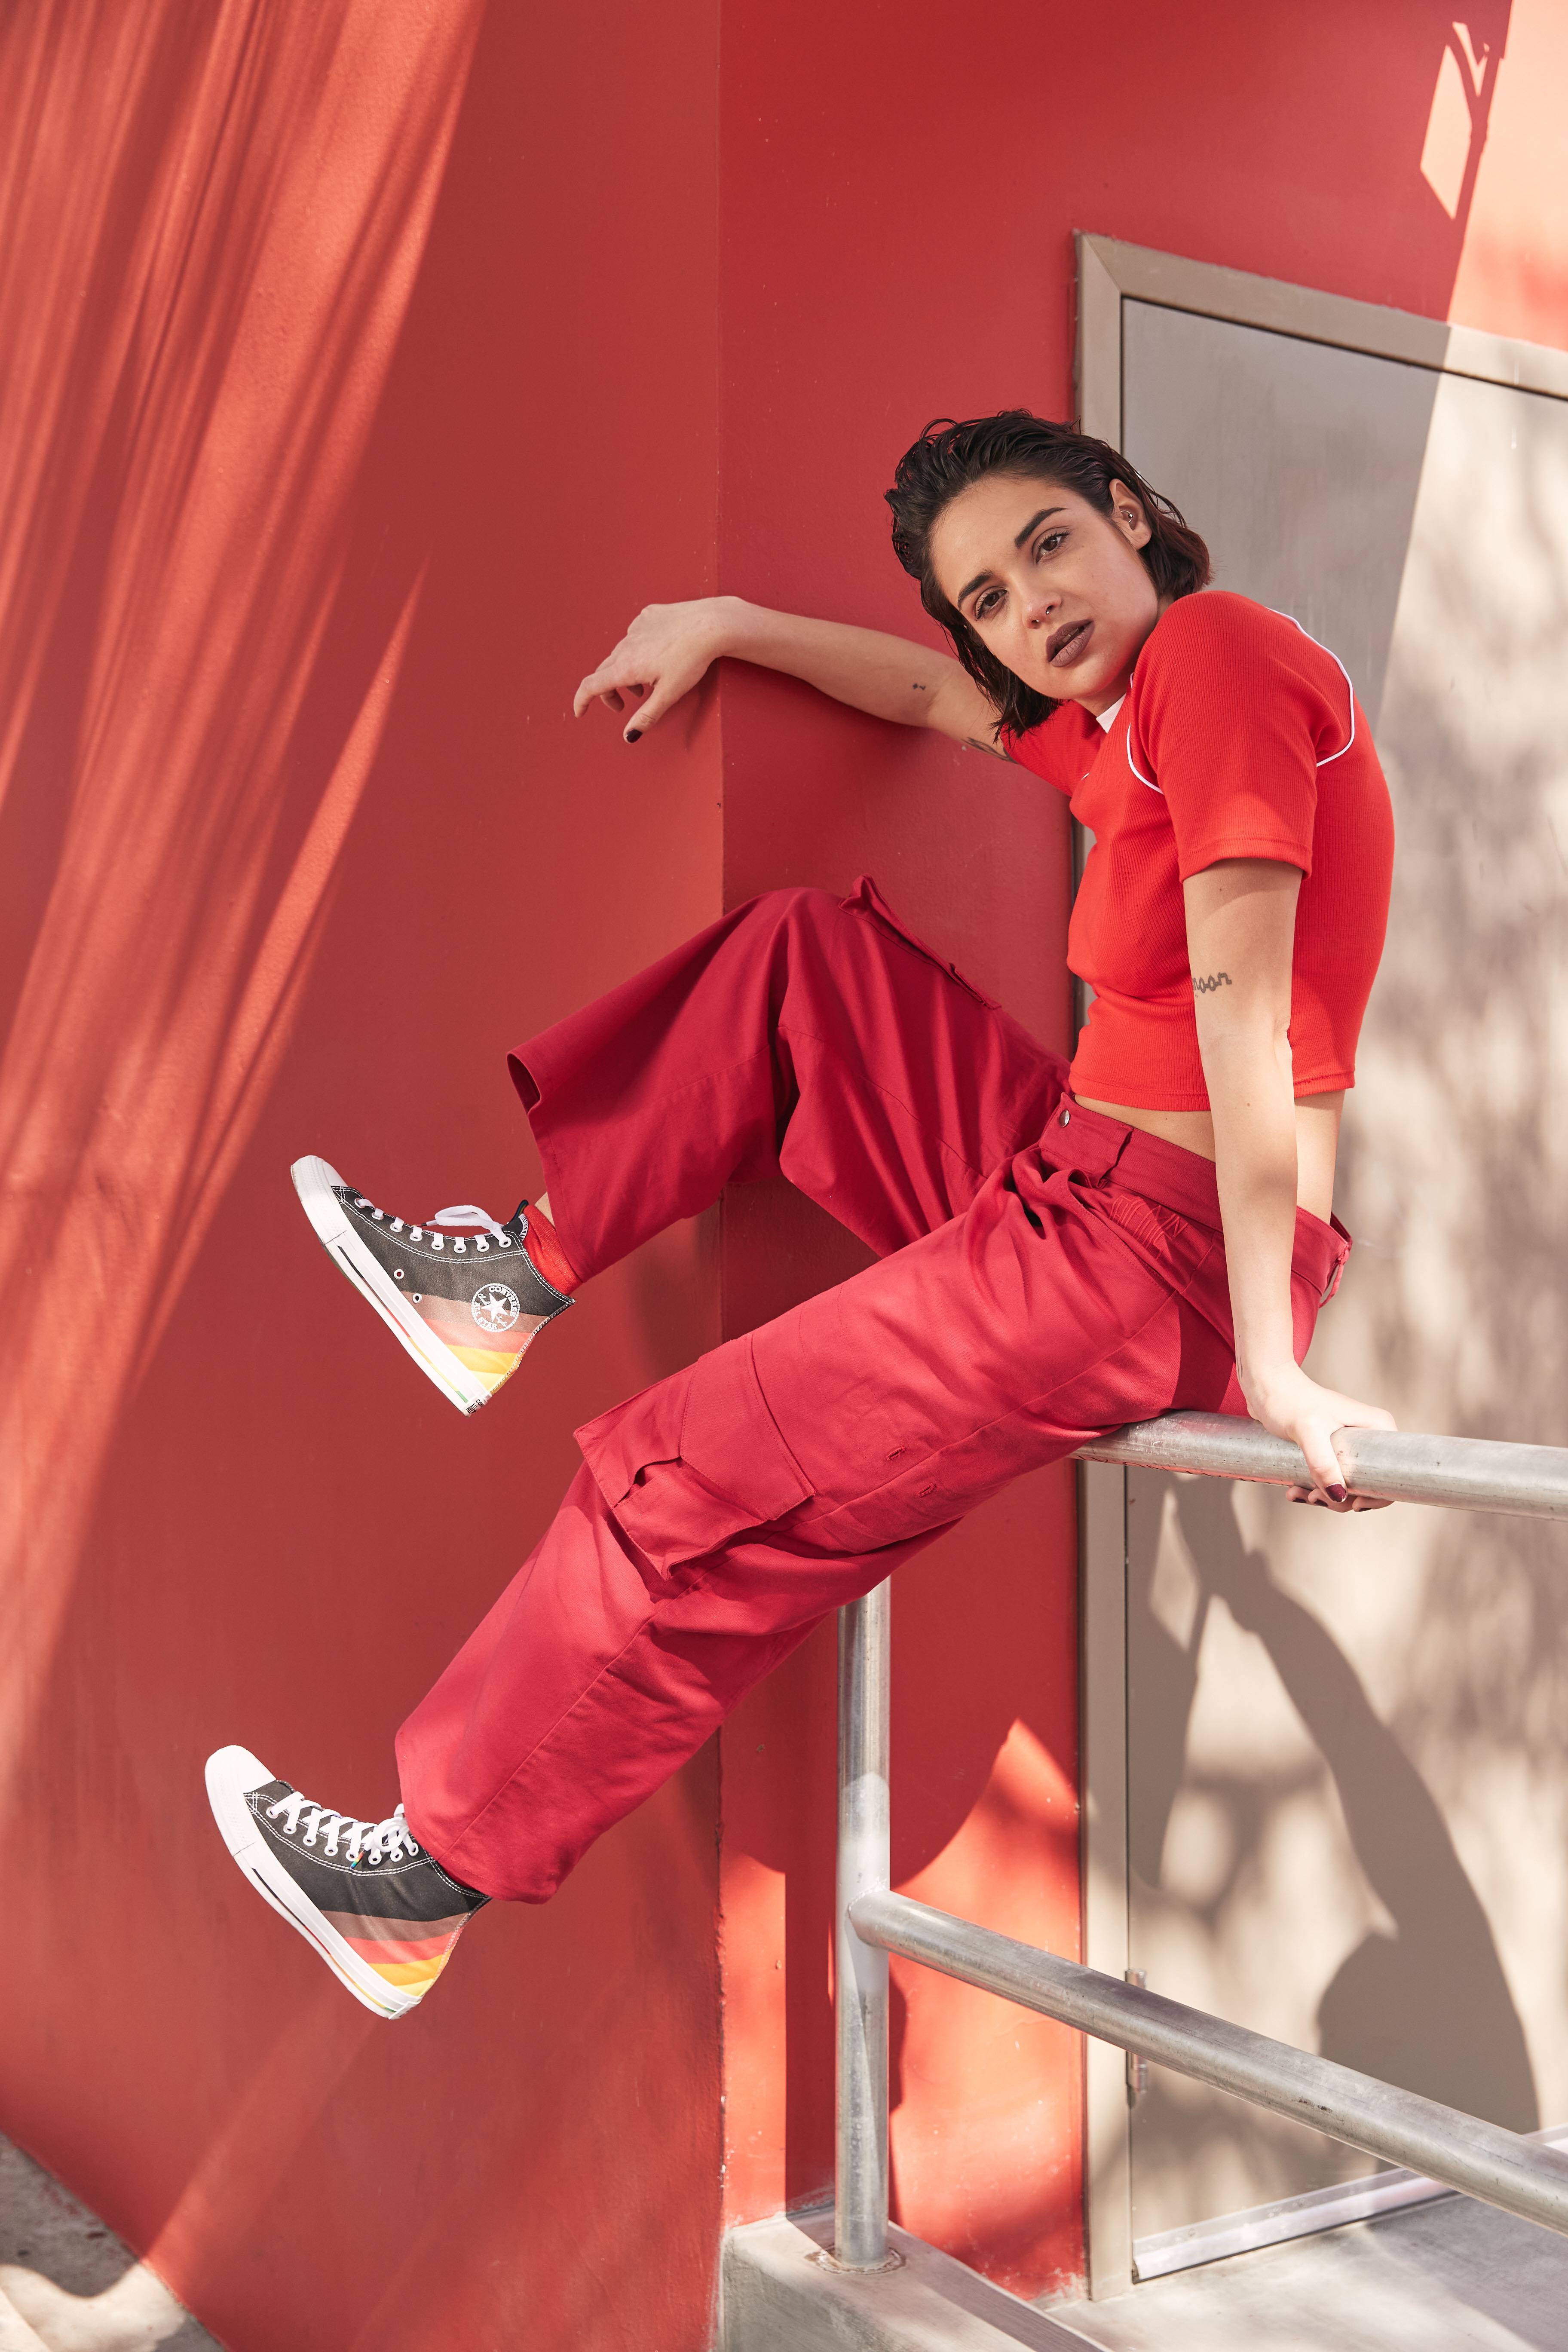 Converse - WhyNot Mag